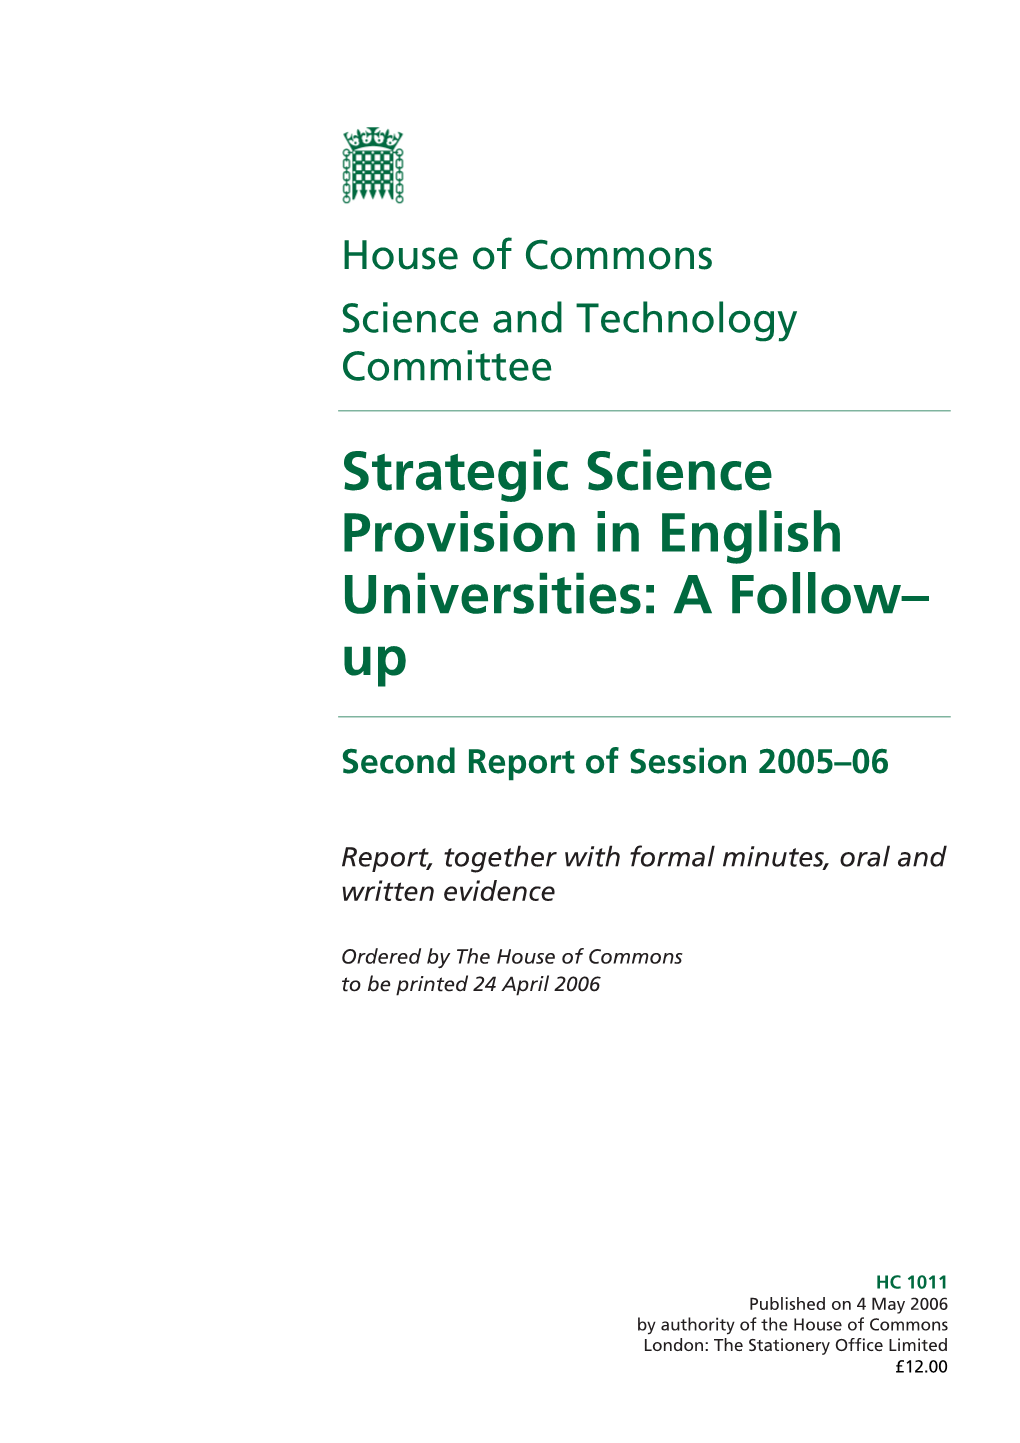 Strategic Science Provision in English Universities: a Follow– Up